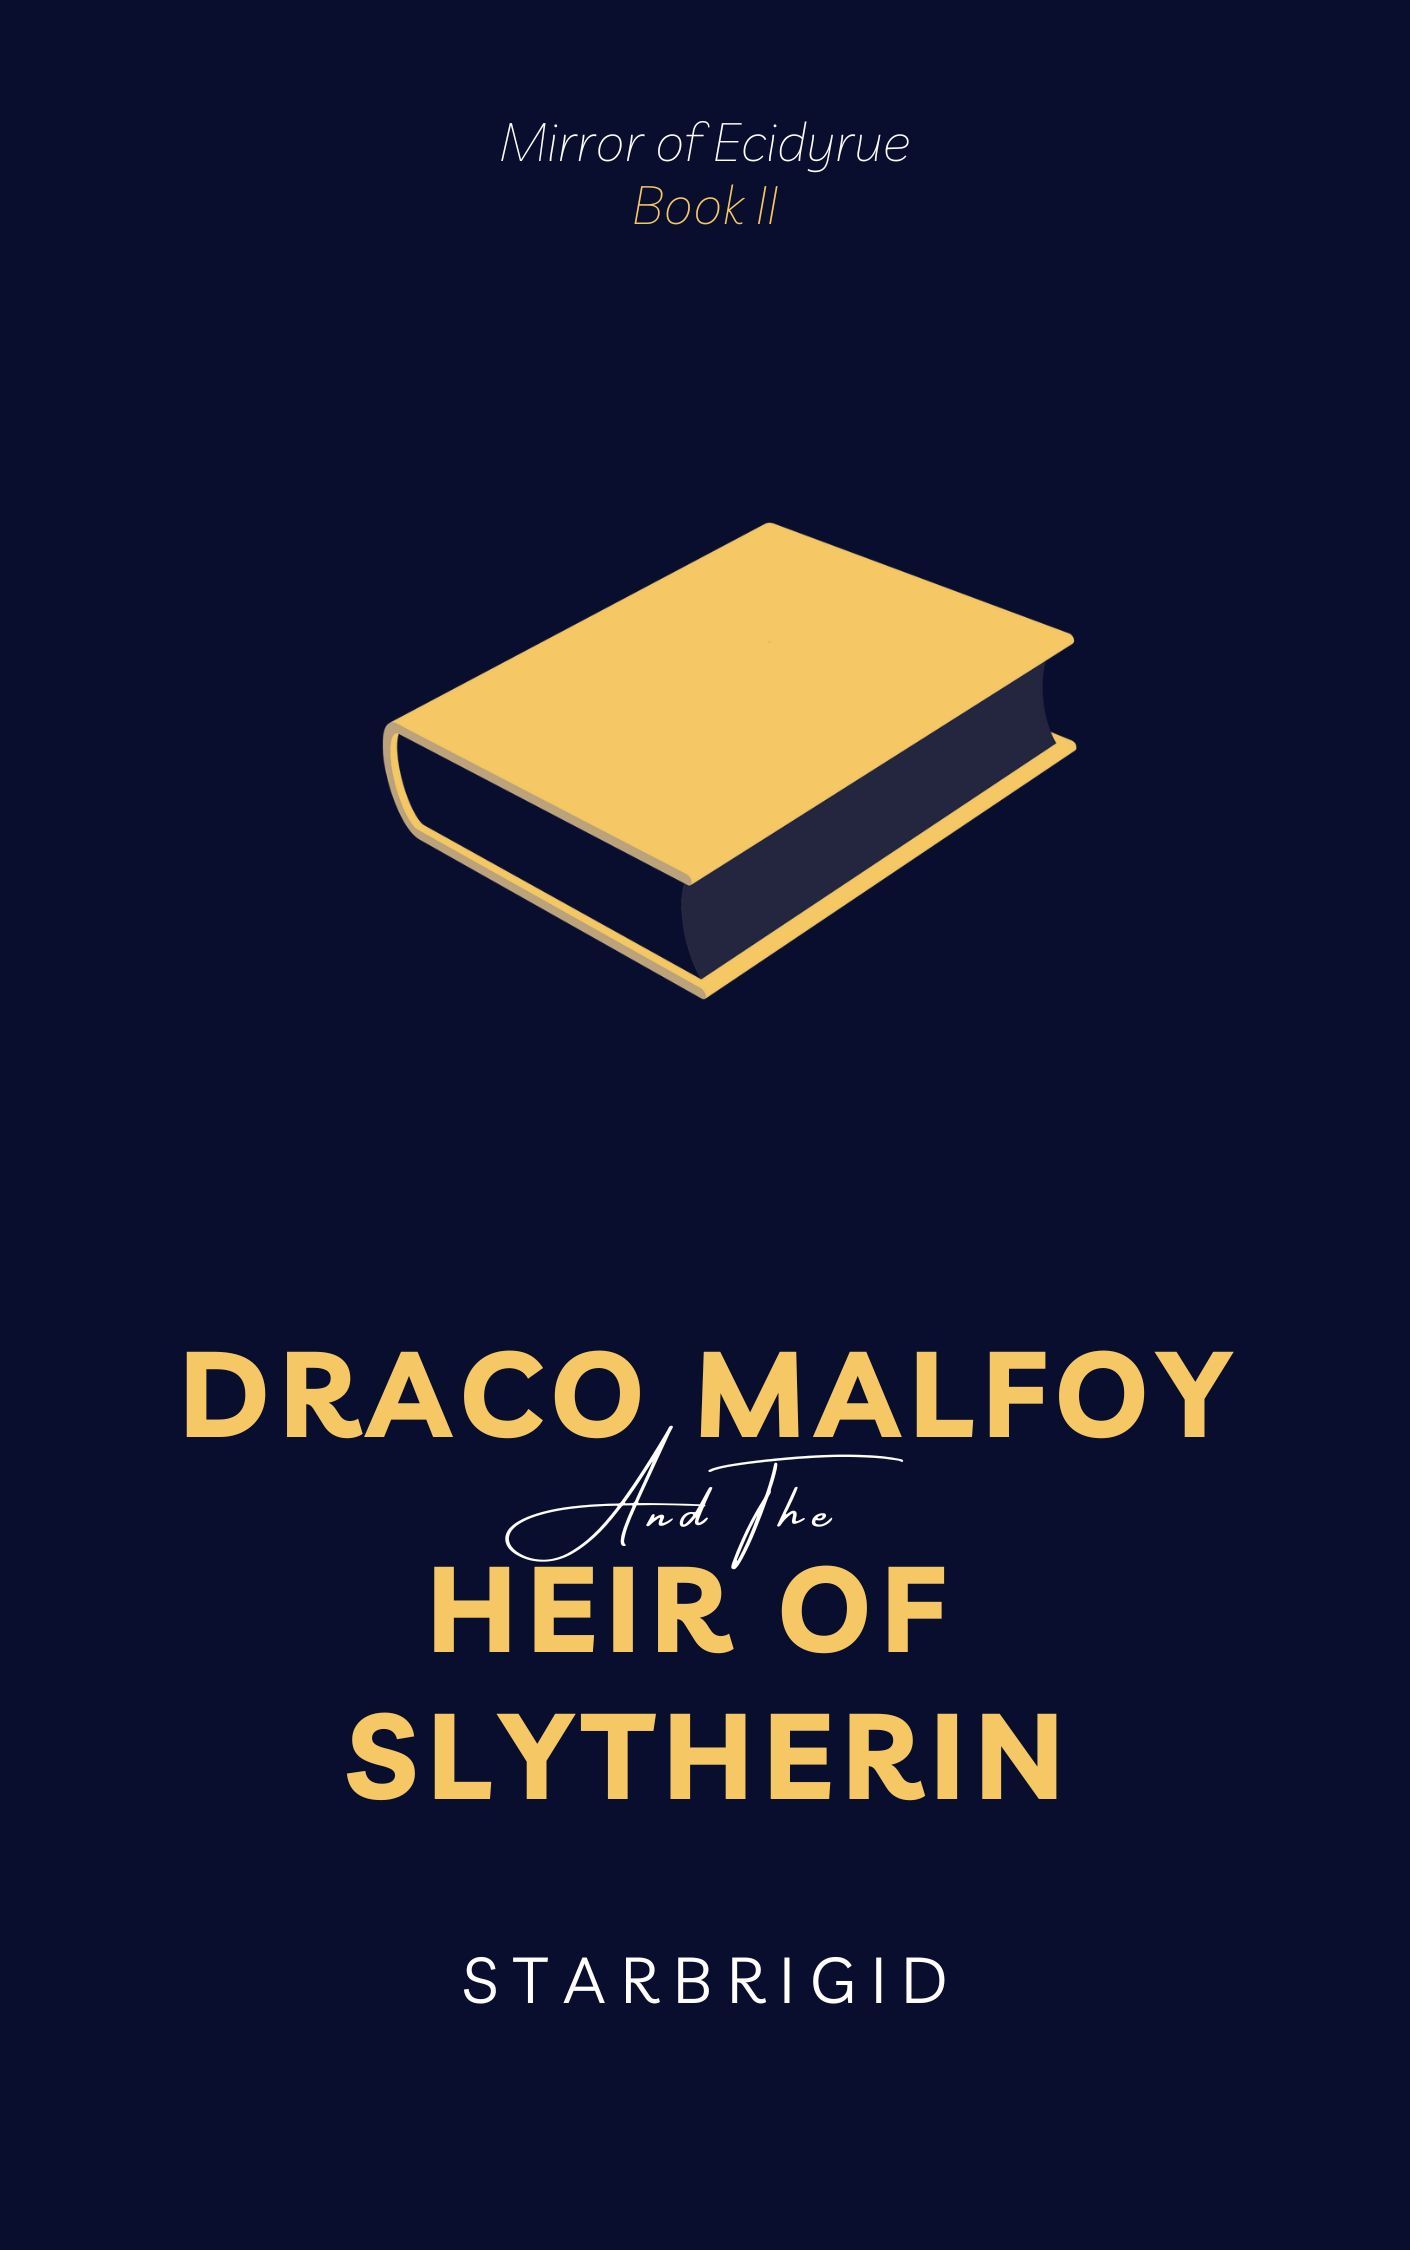 Cover of Draco Malfoy and the Heir of Slytherin.